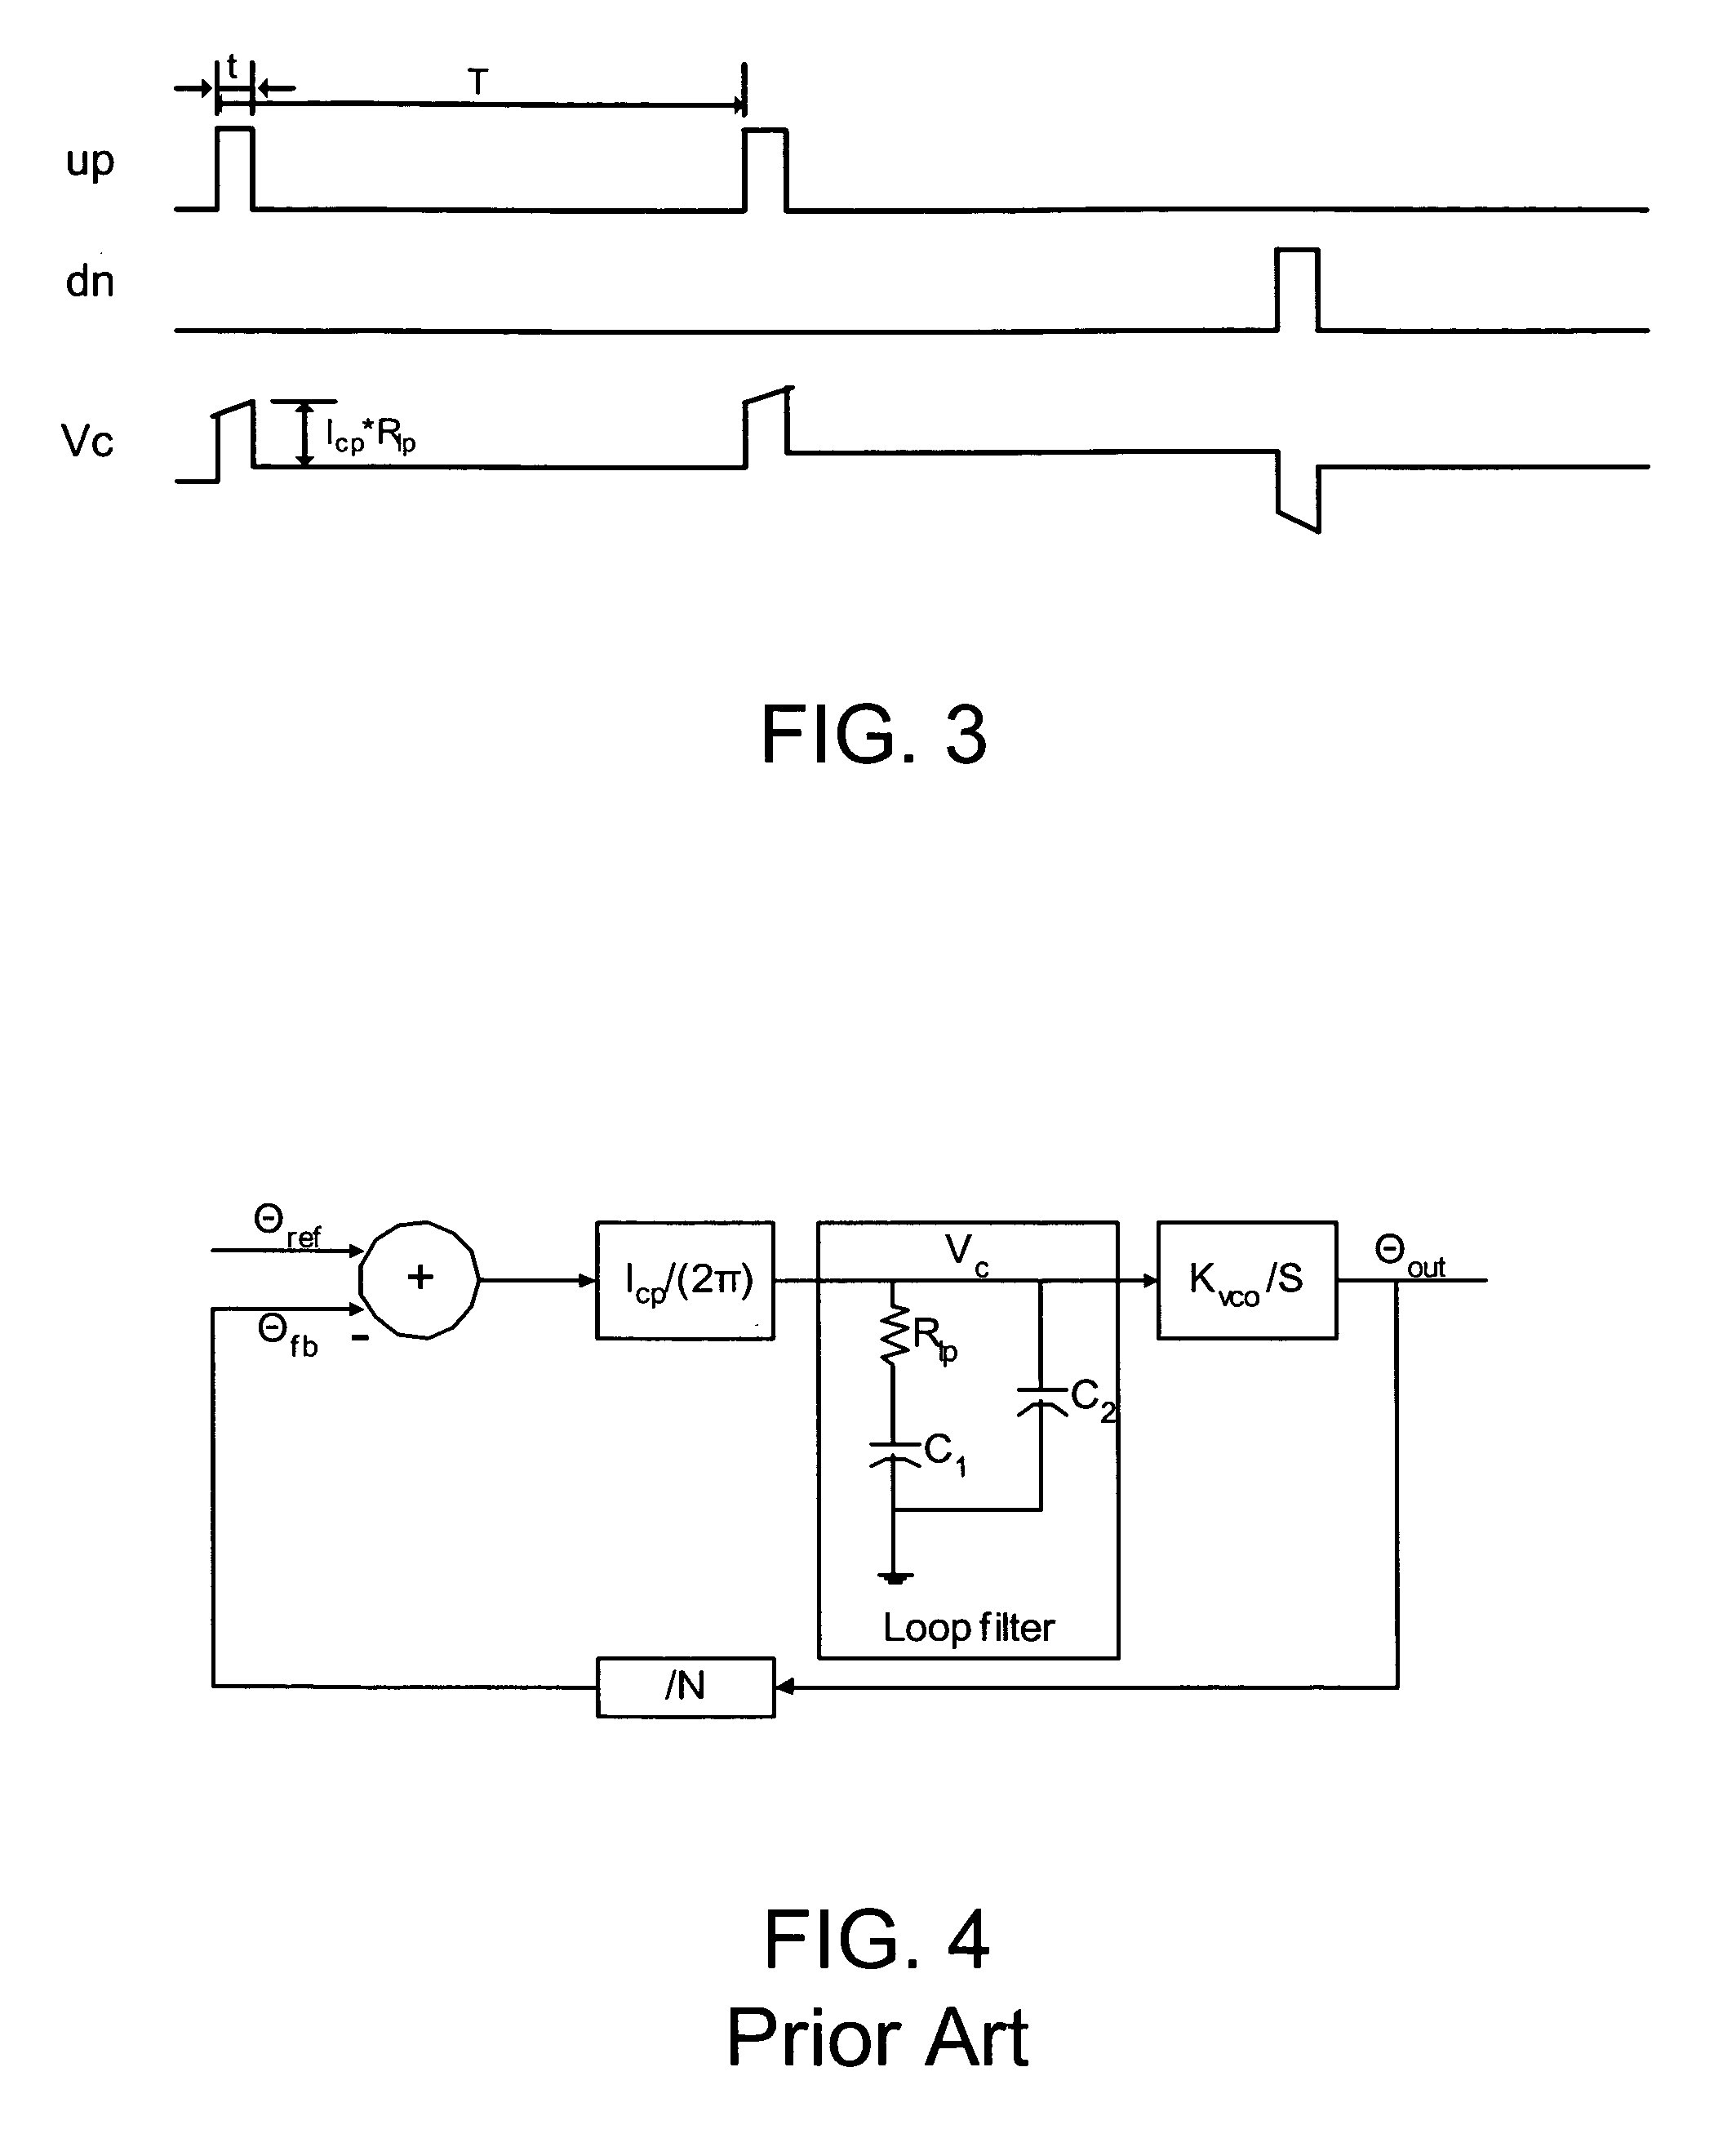 Phase-locked loop circuits with current mode loop filters